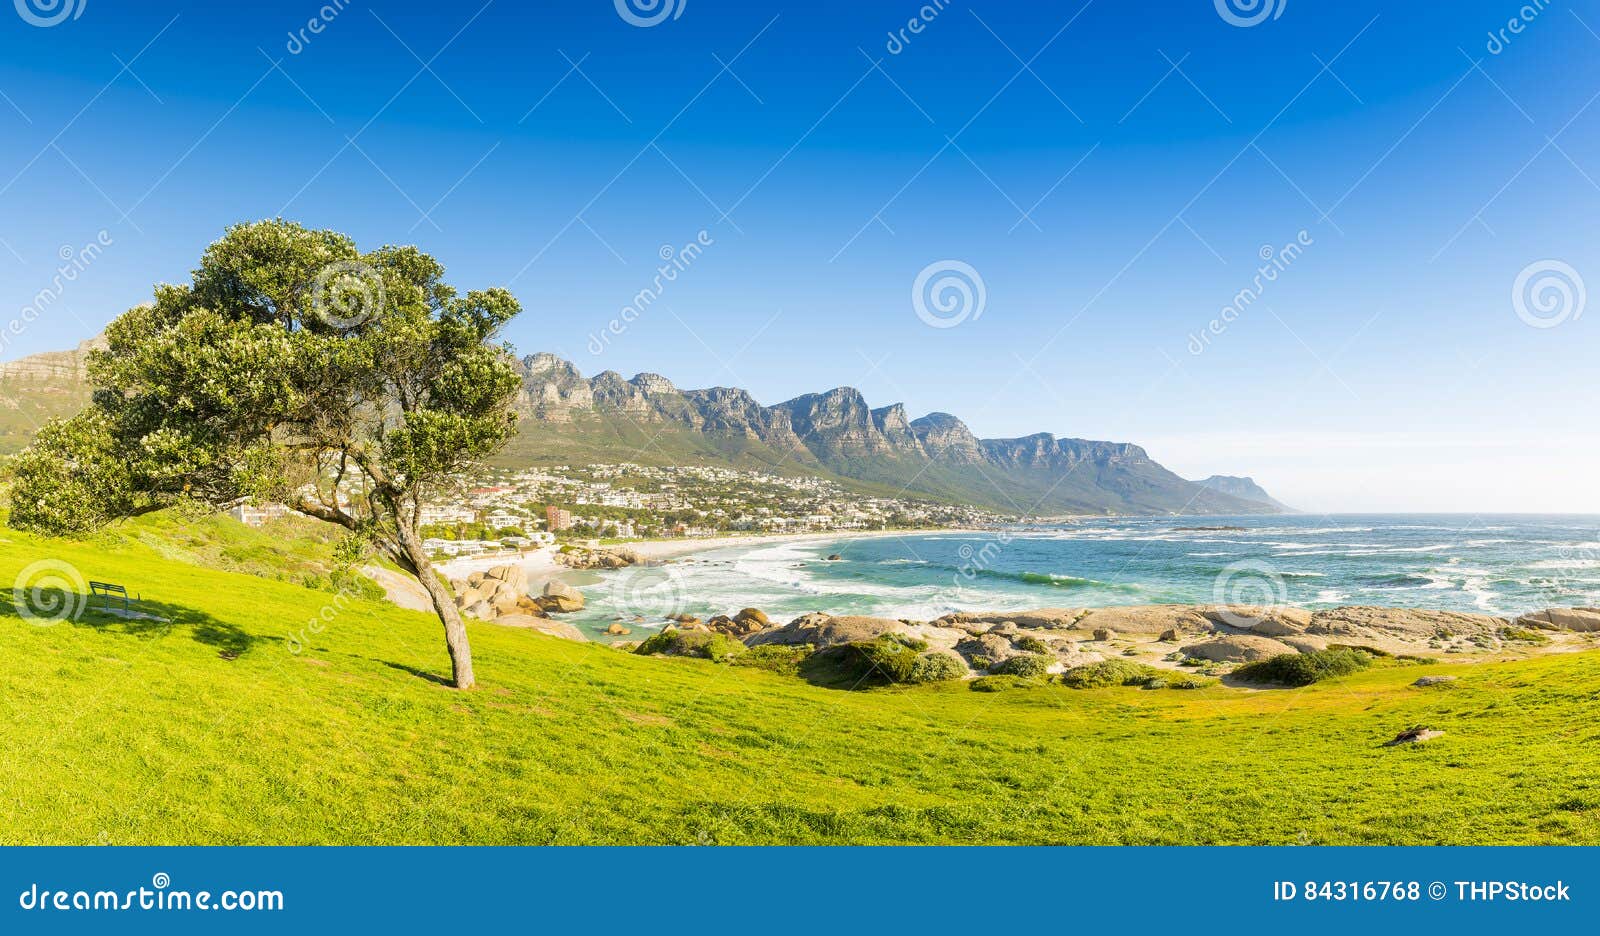 Camps Bay In Cape Town South Africa Stock Photo Image Of Mountain